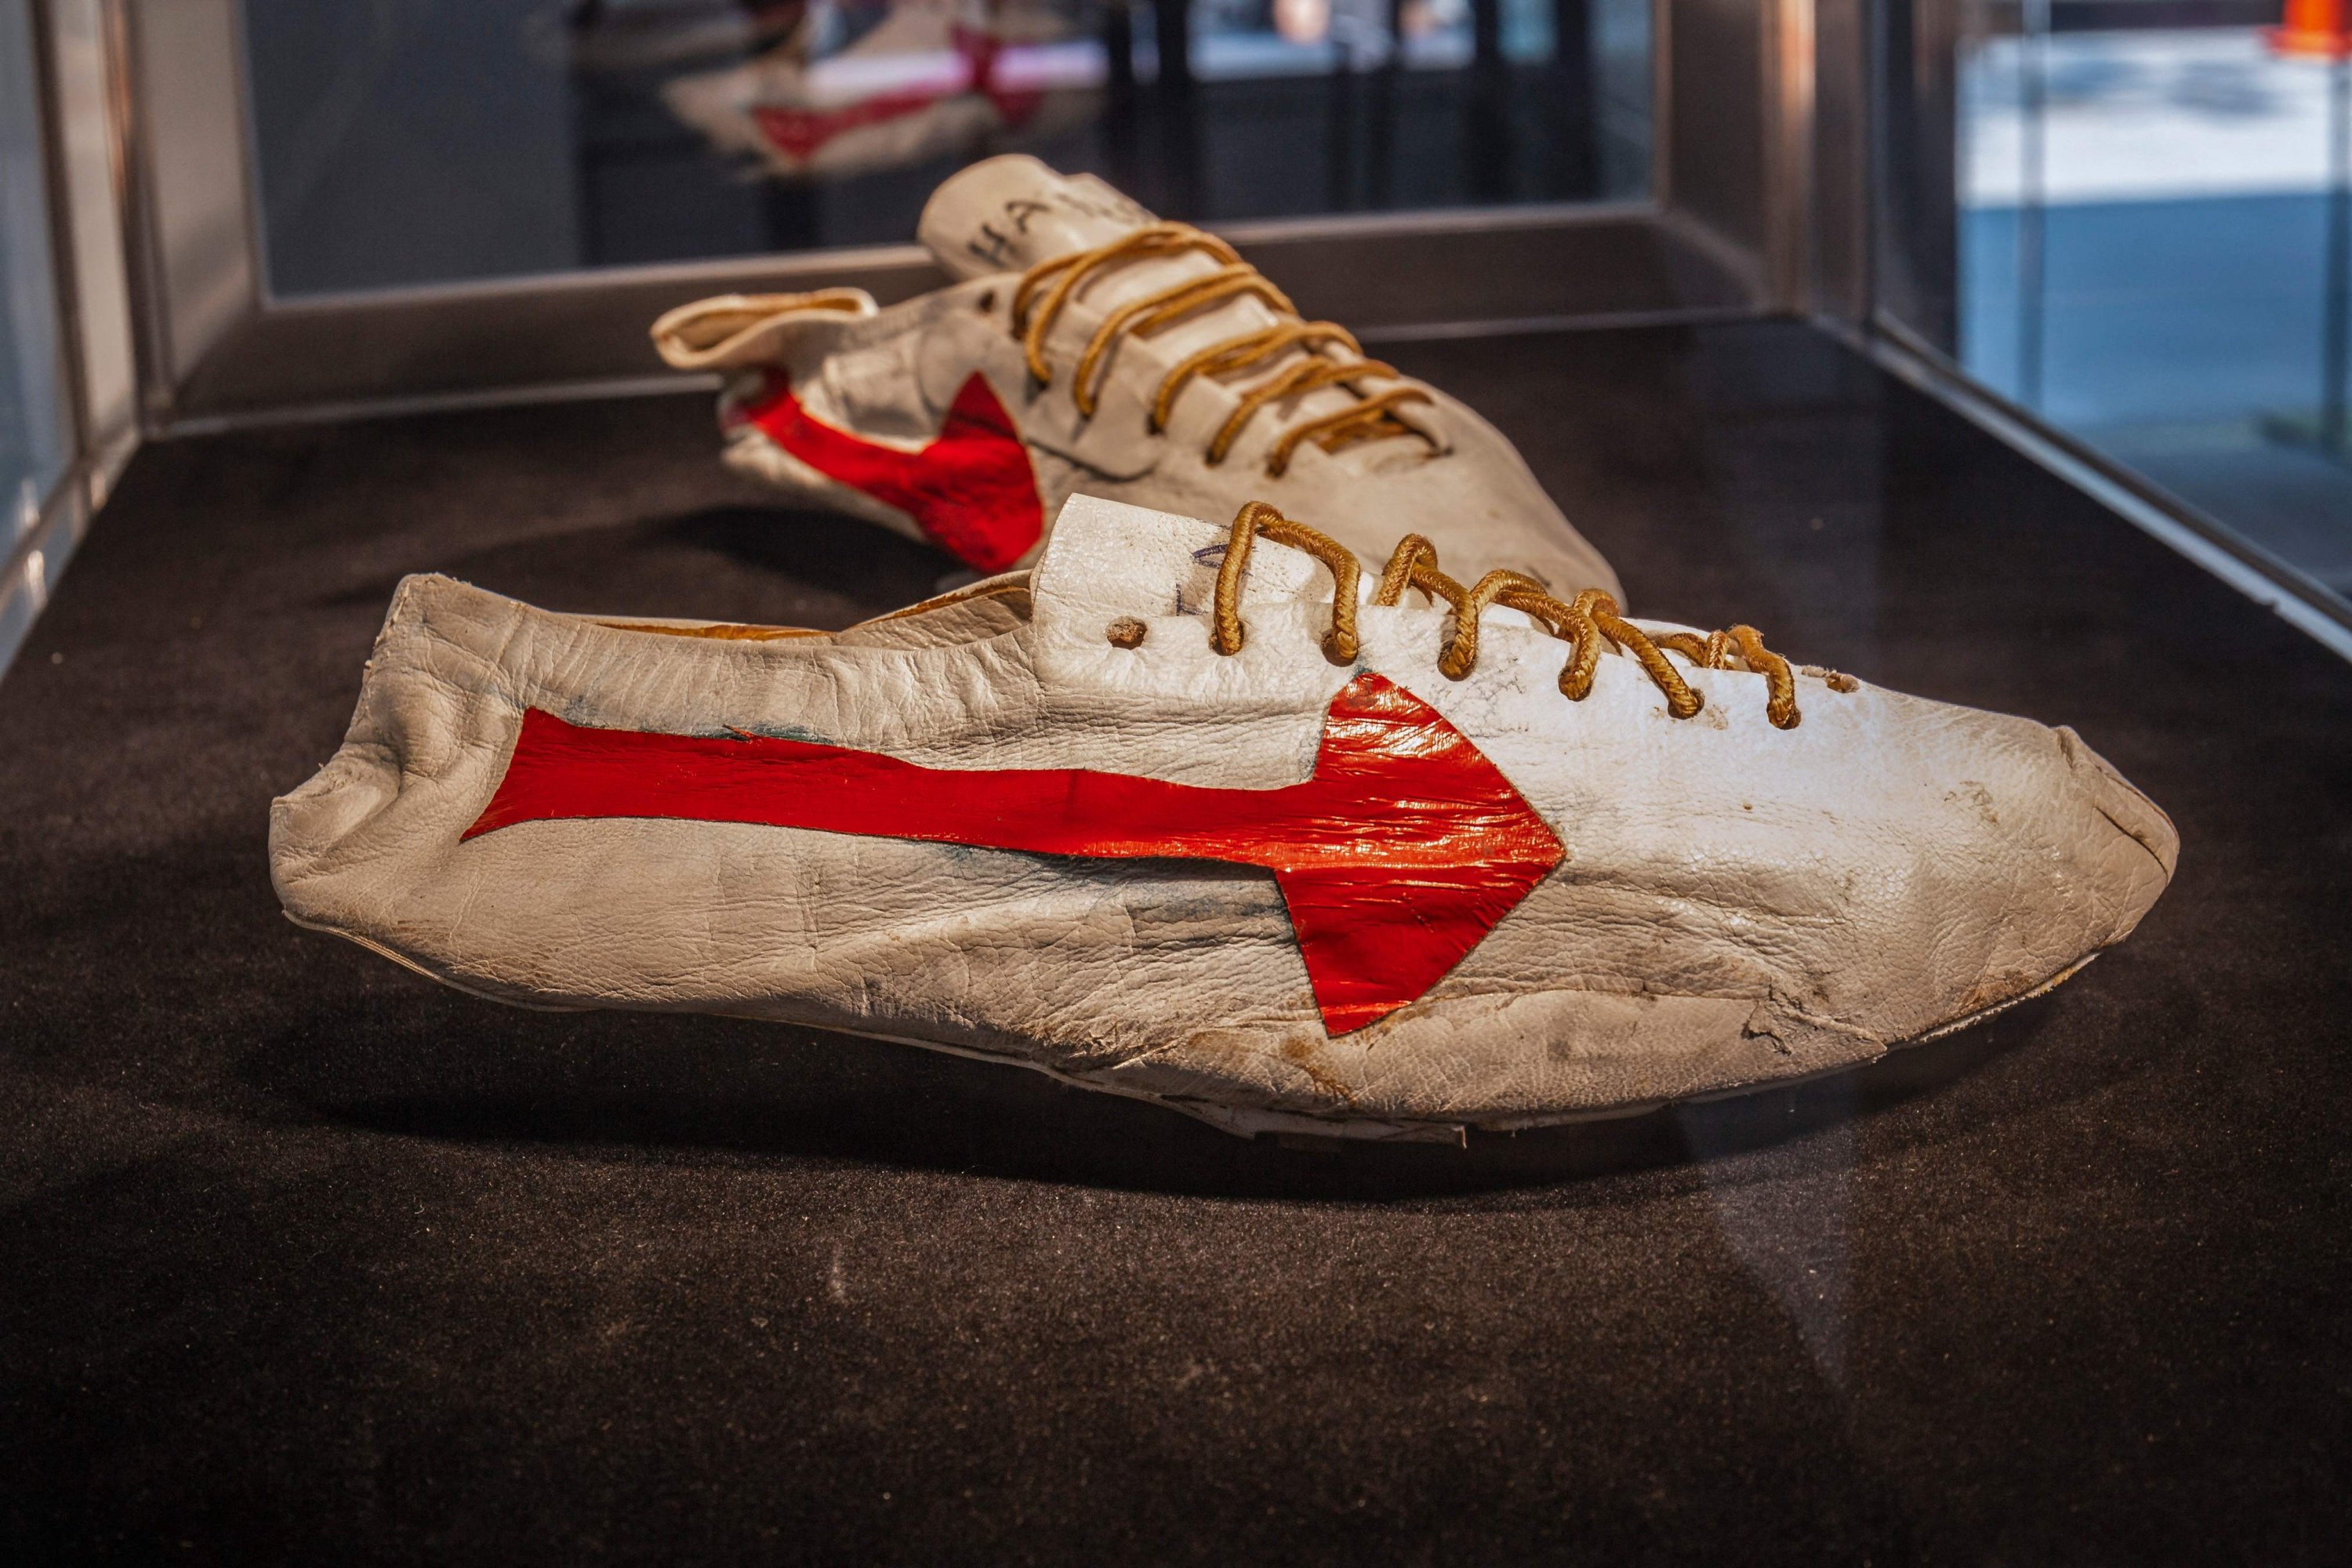 Sotheby's $1M for rare Nike Olympic shoe that inspired iconic swoosh logo | Daily Sabah